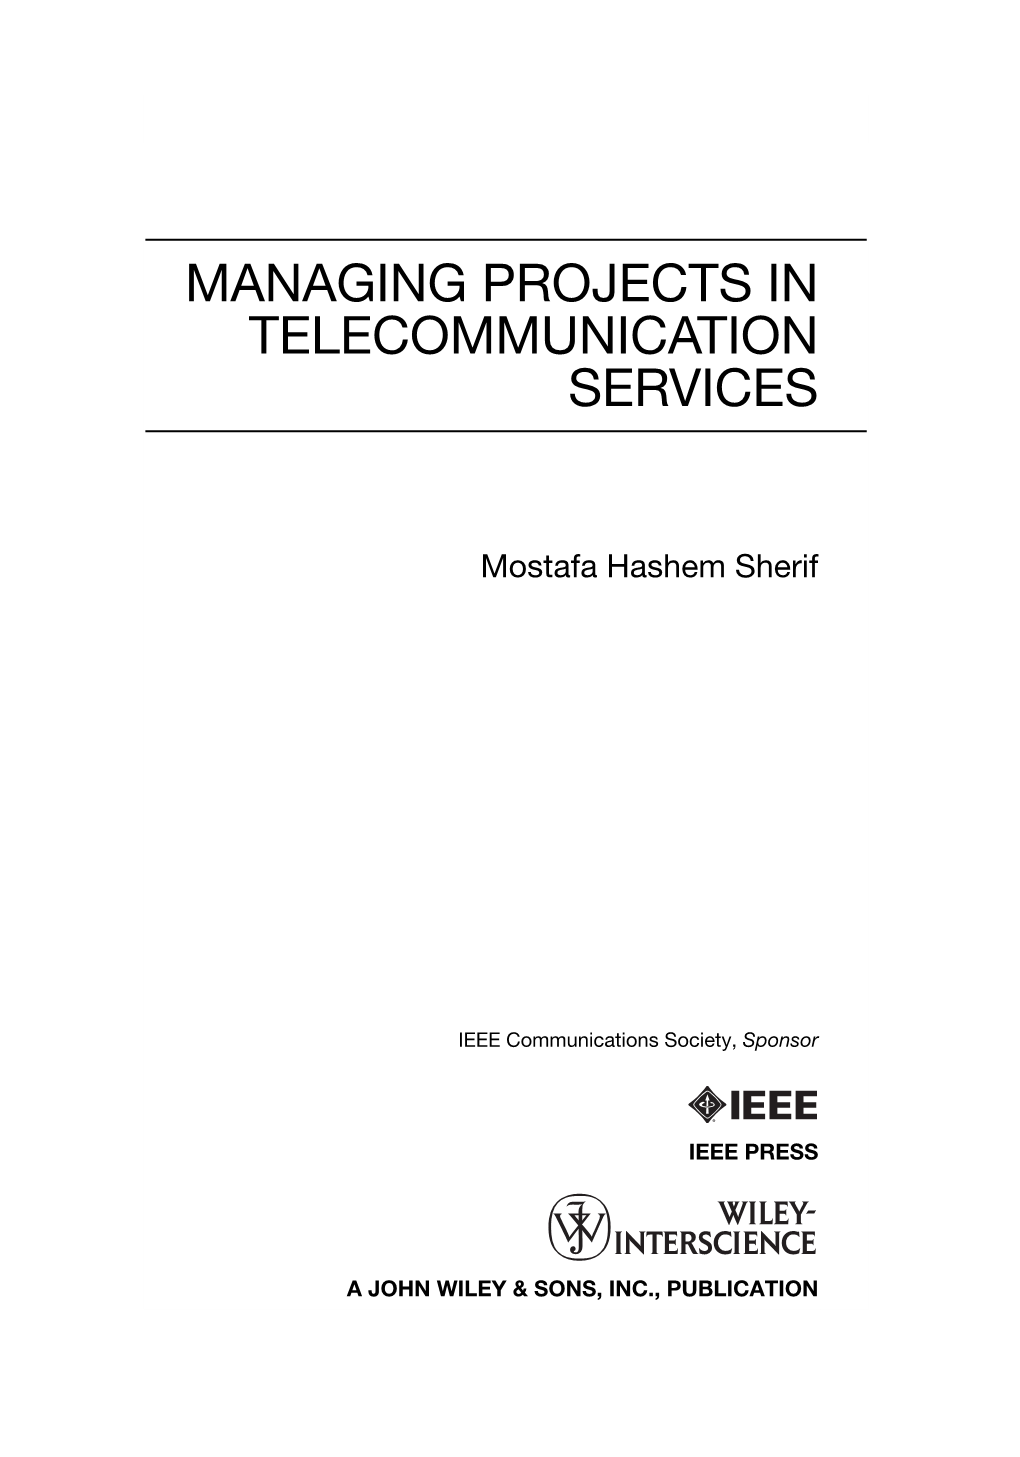 Managing Projects in Telecommunication Services